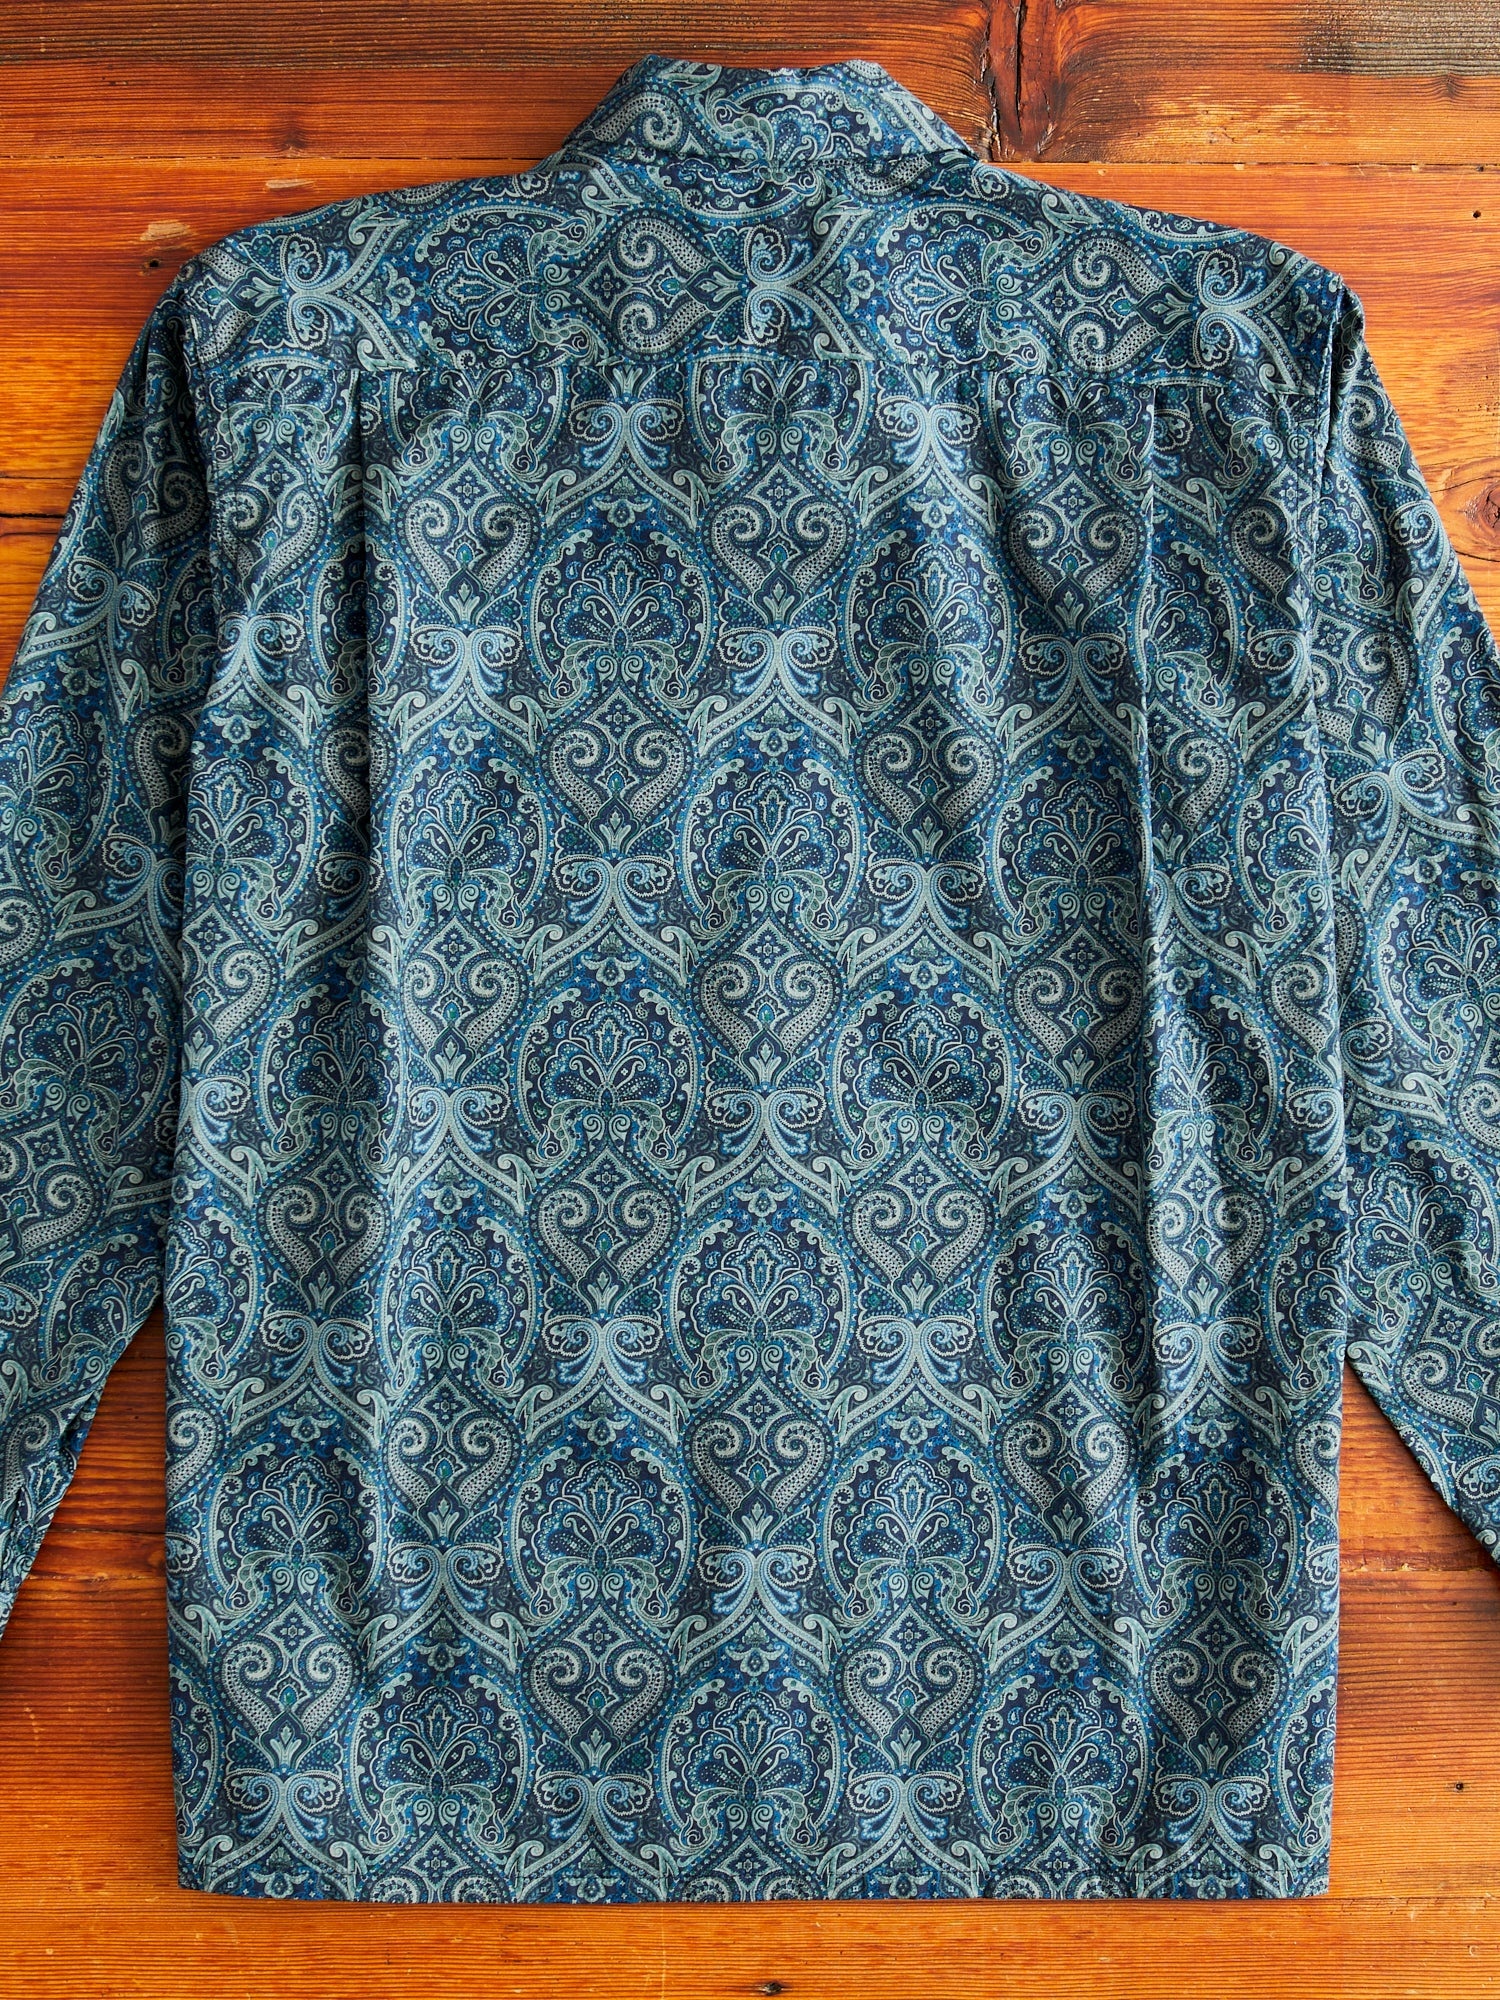 Classic Shirt in Navy Cotton Paisley Print - 11